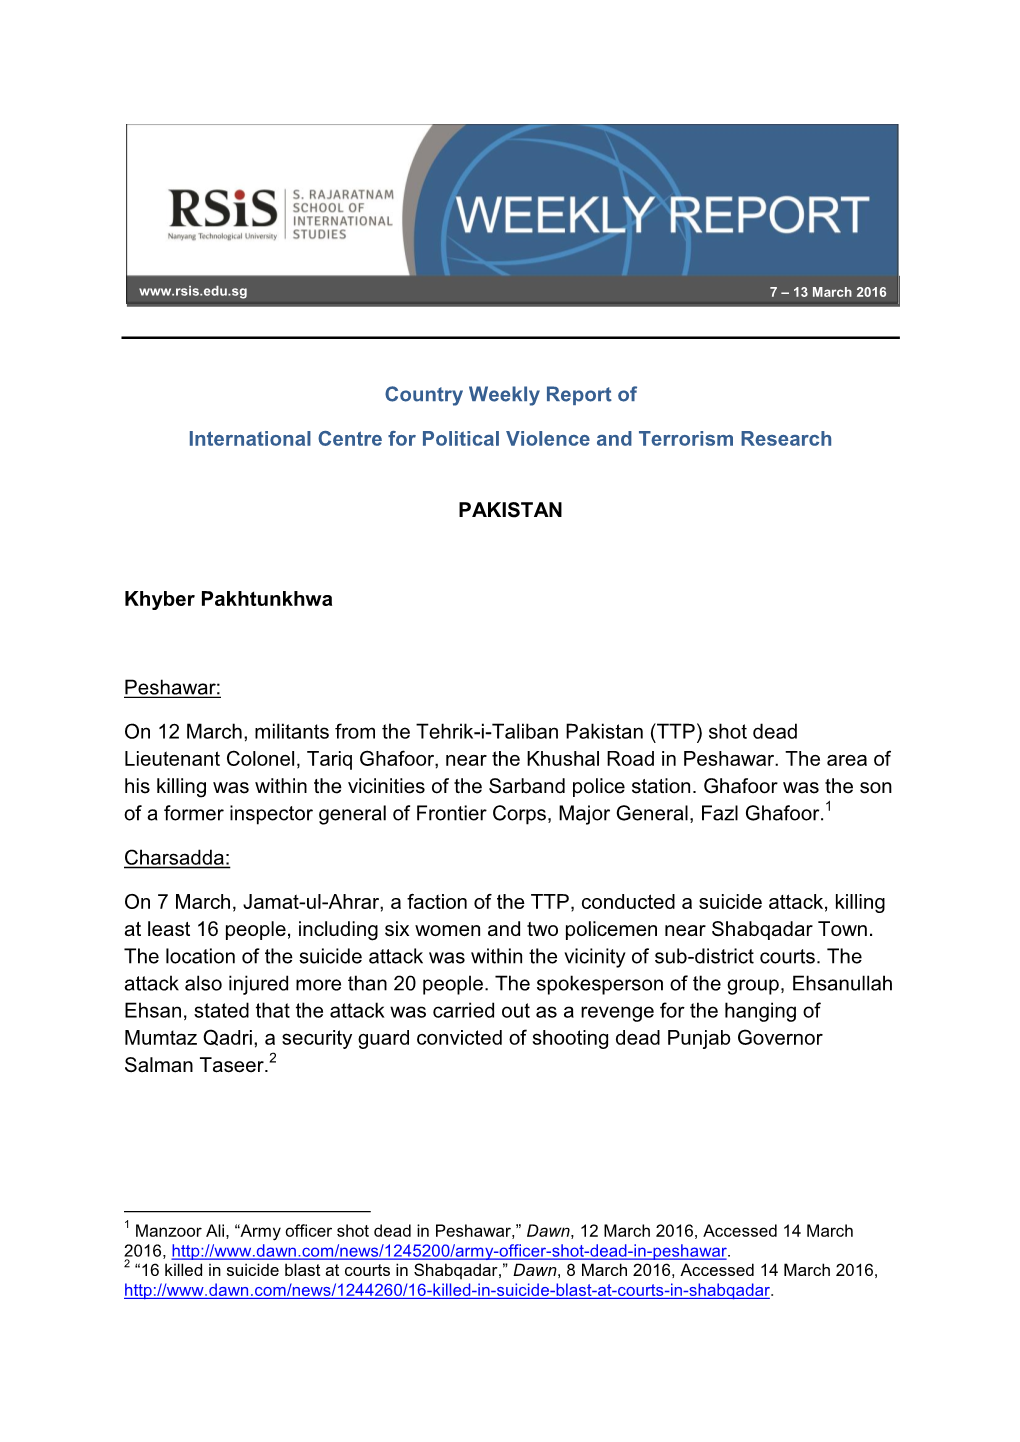 Country Weekly Report of International Centre for Political Violence and Terrorism Research PAKISTAN Khyber Pakhtunkhwa Peshawar